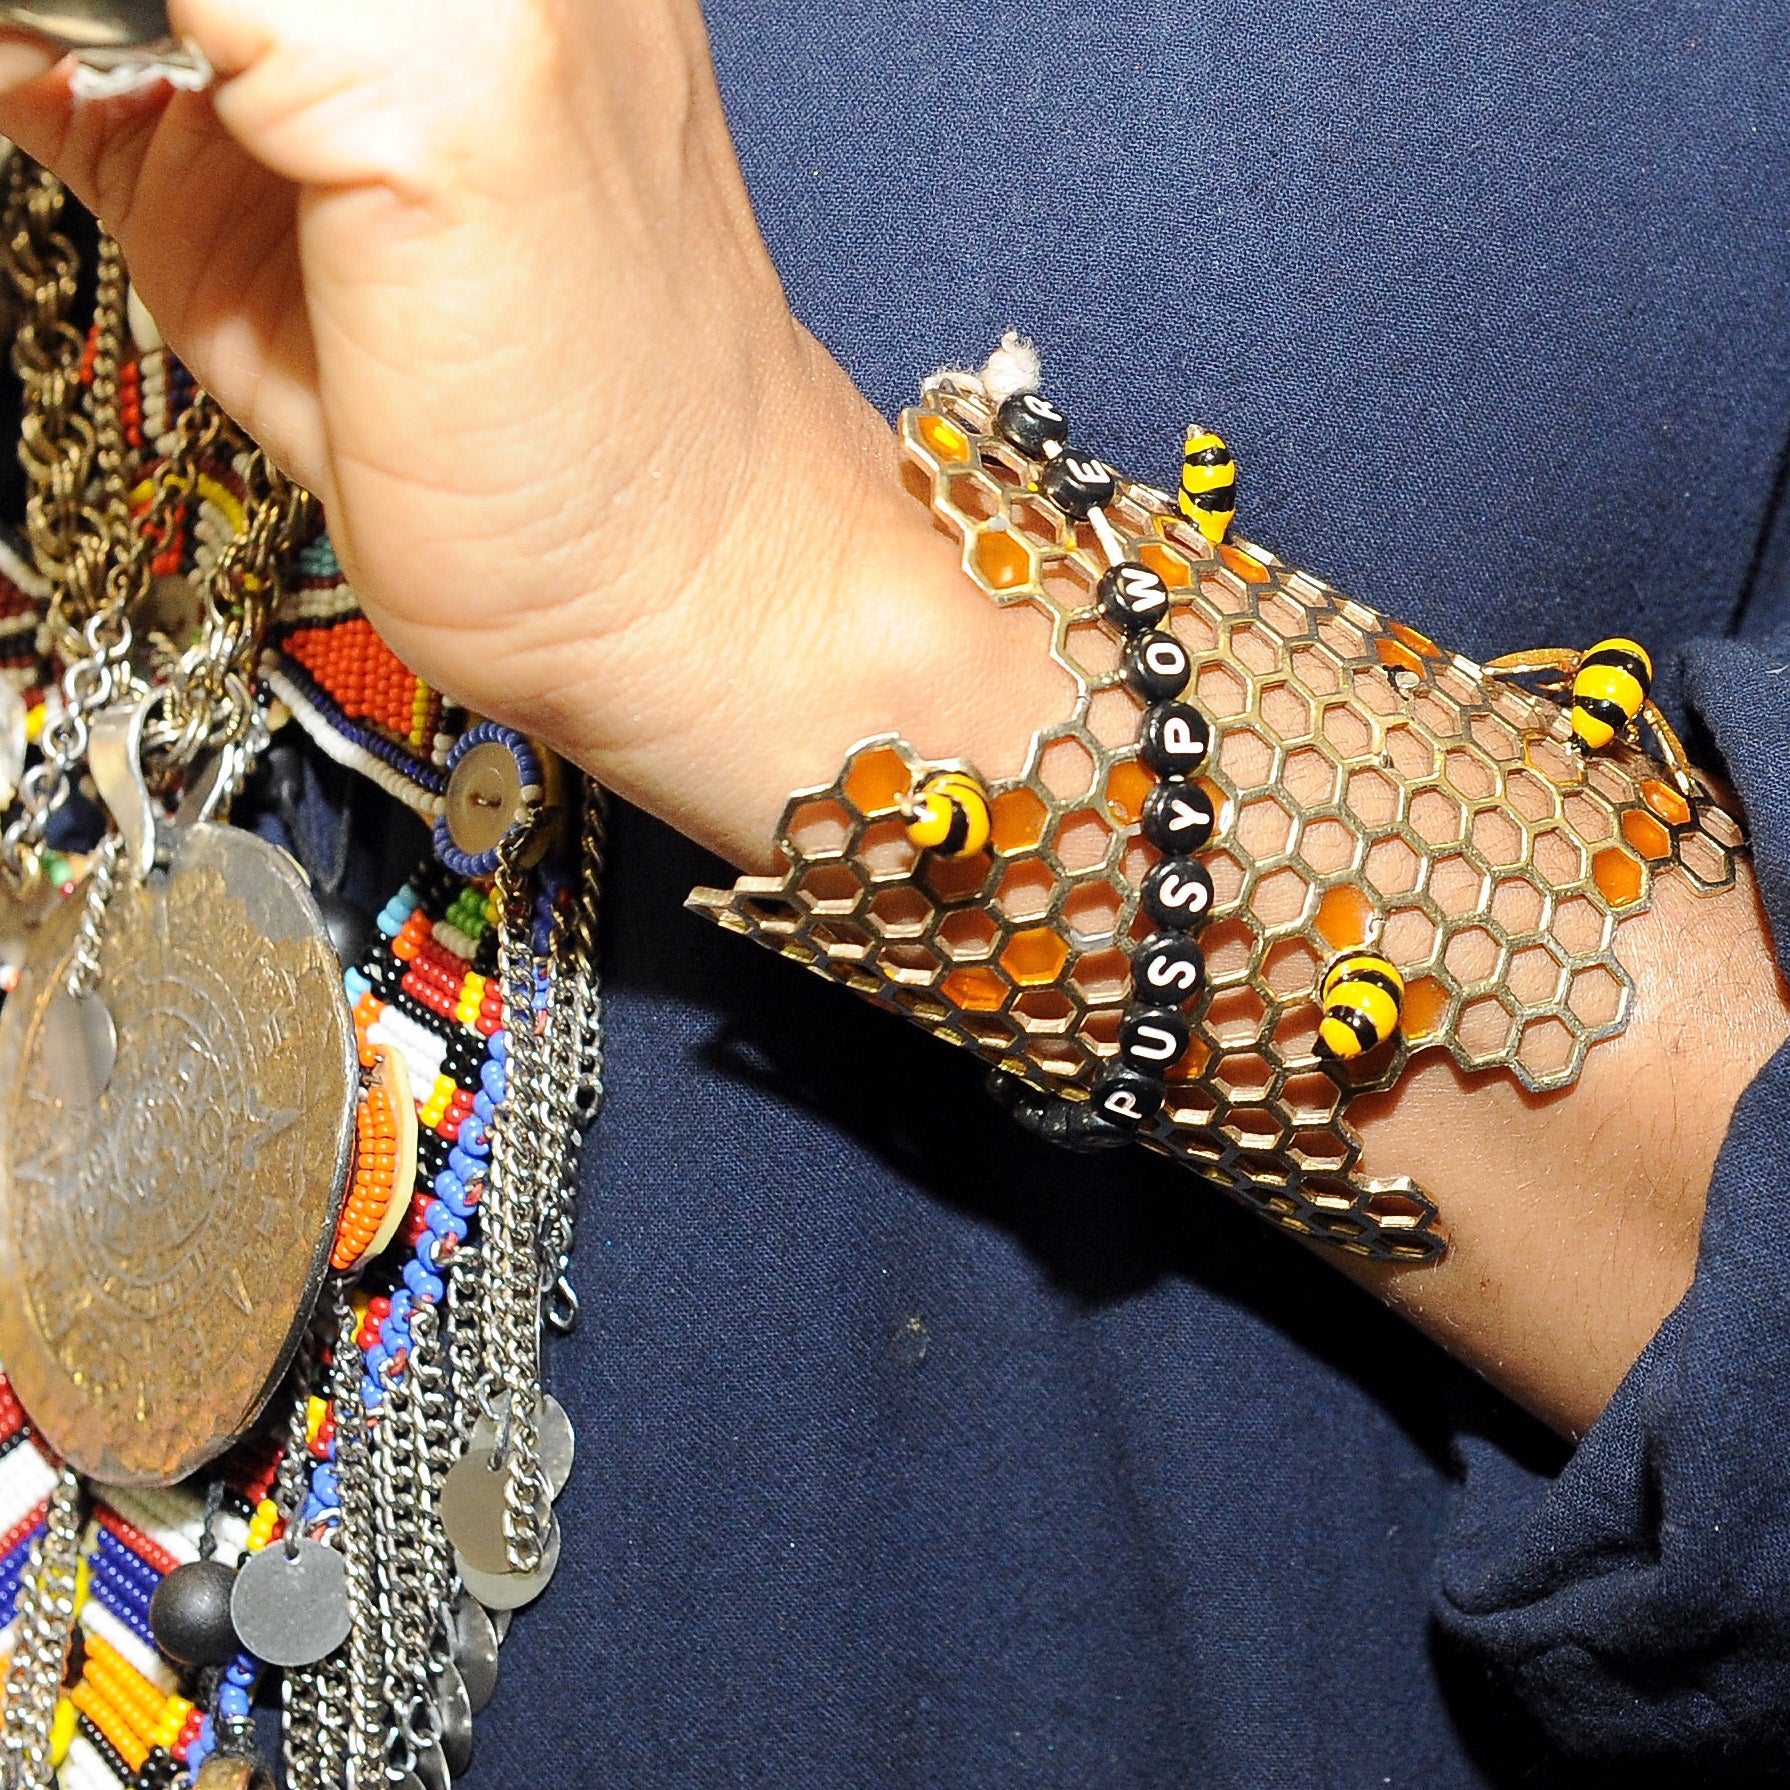 Erykah Badu's Arm Party Game Is Serious
